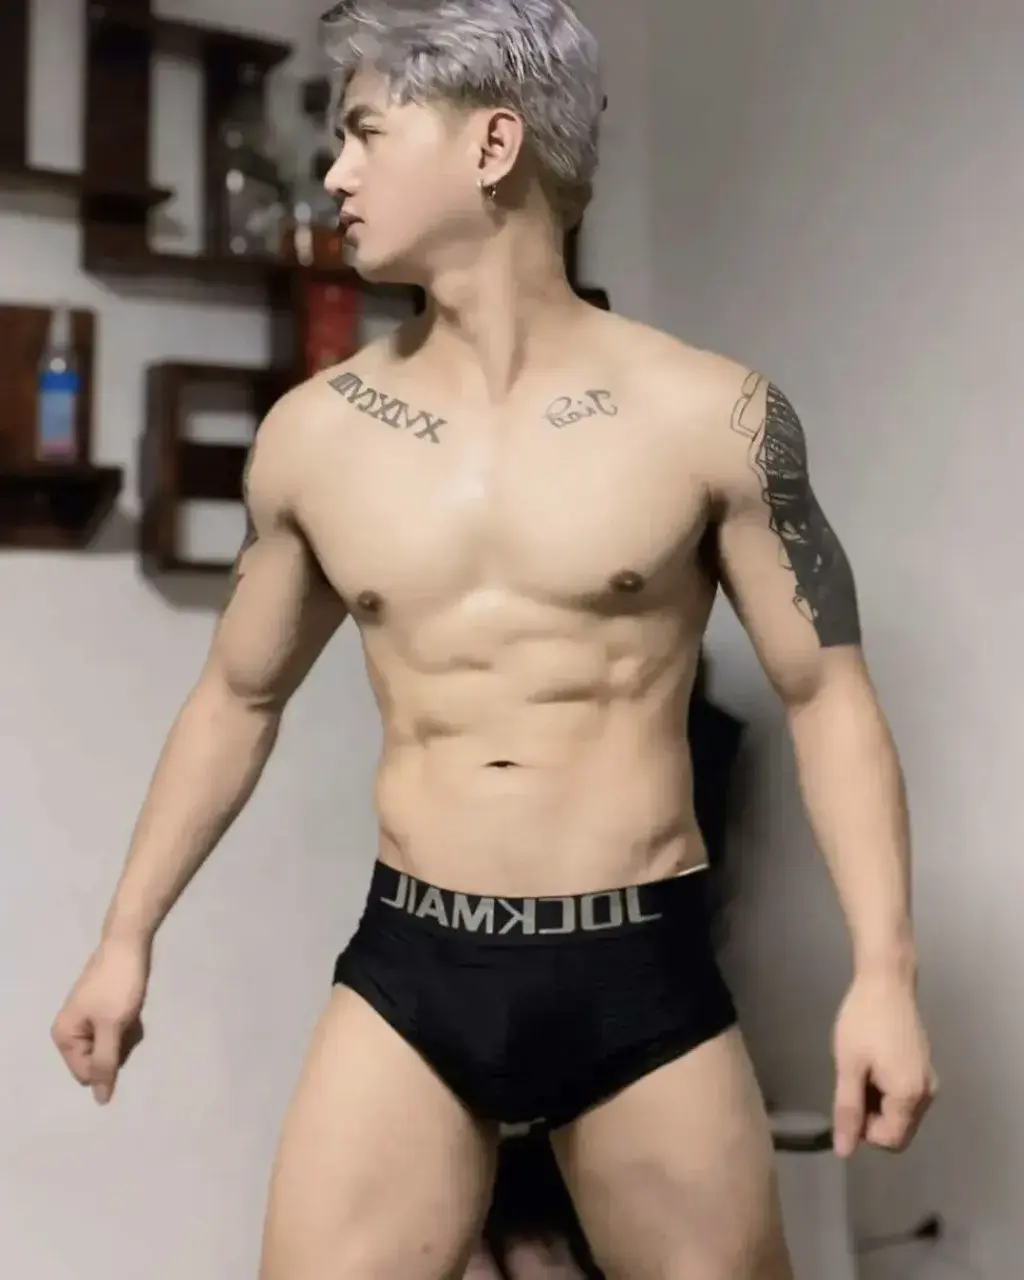 Collection of male models from the Philippines